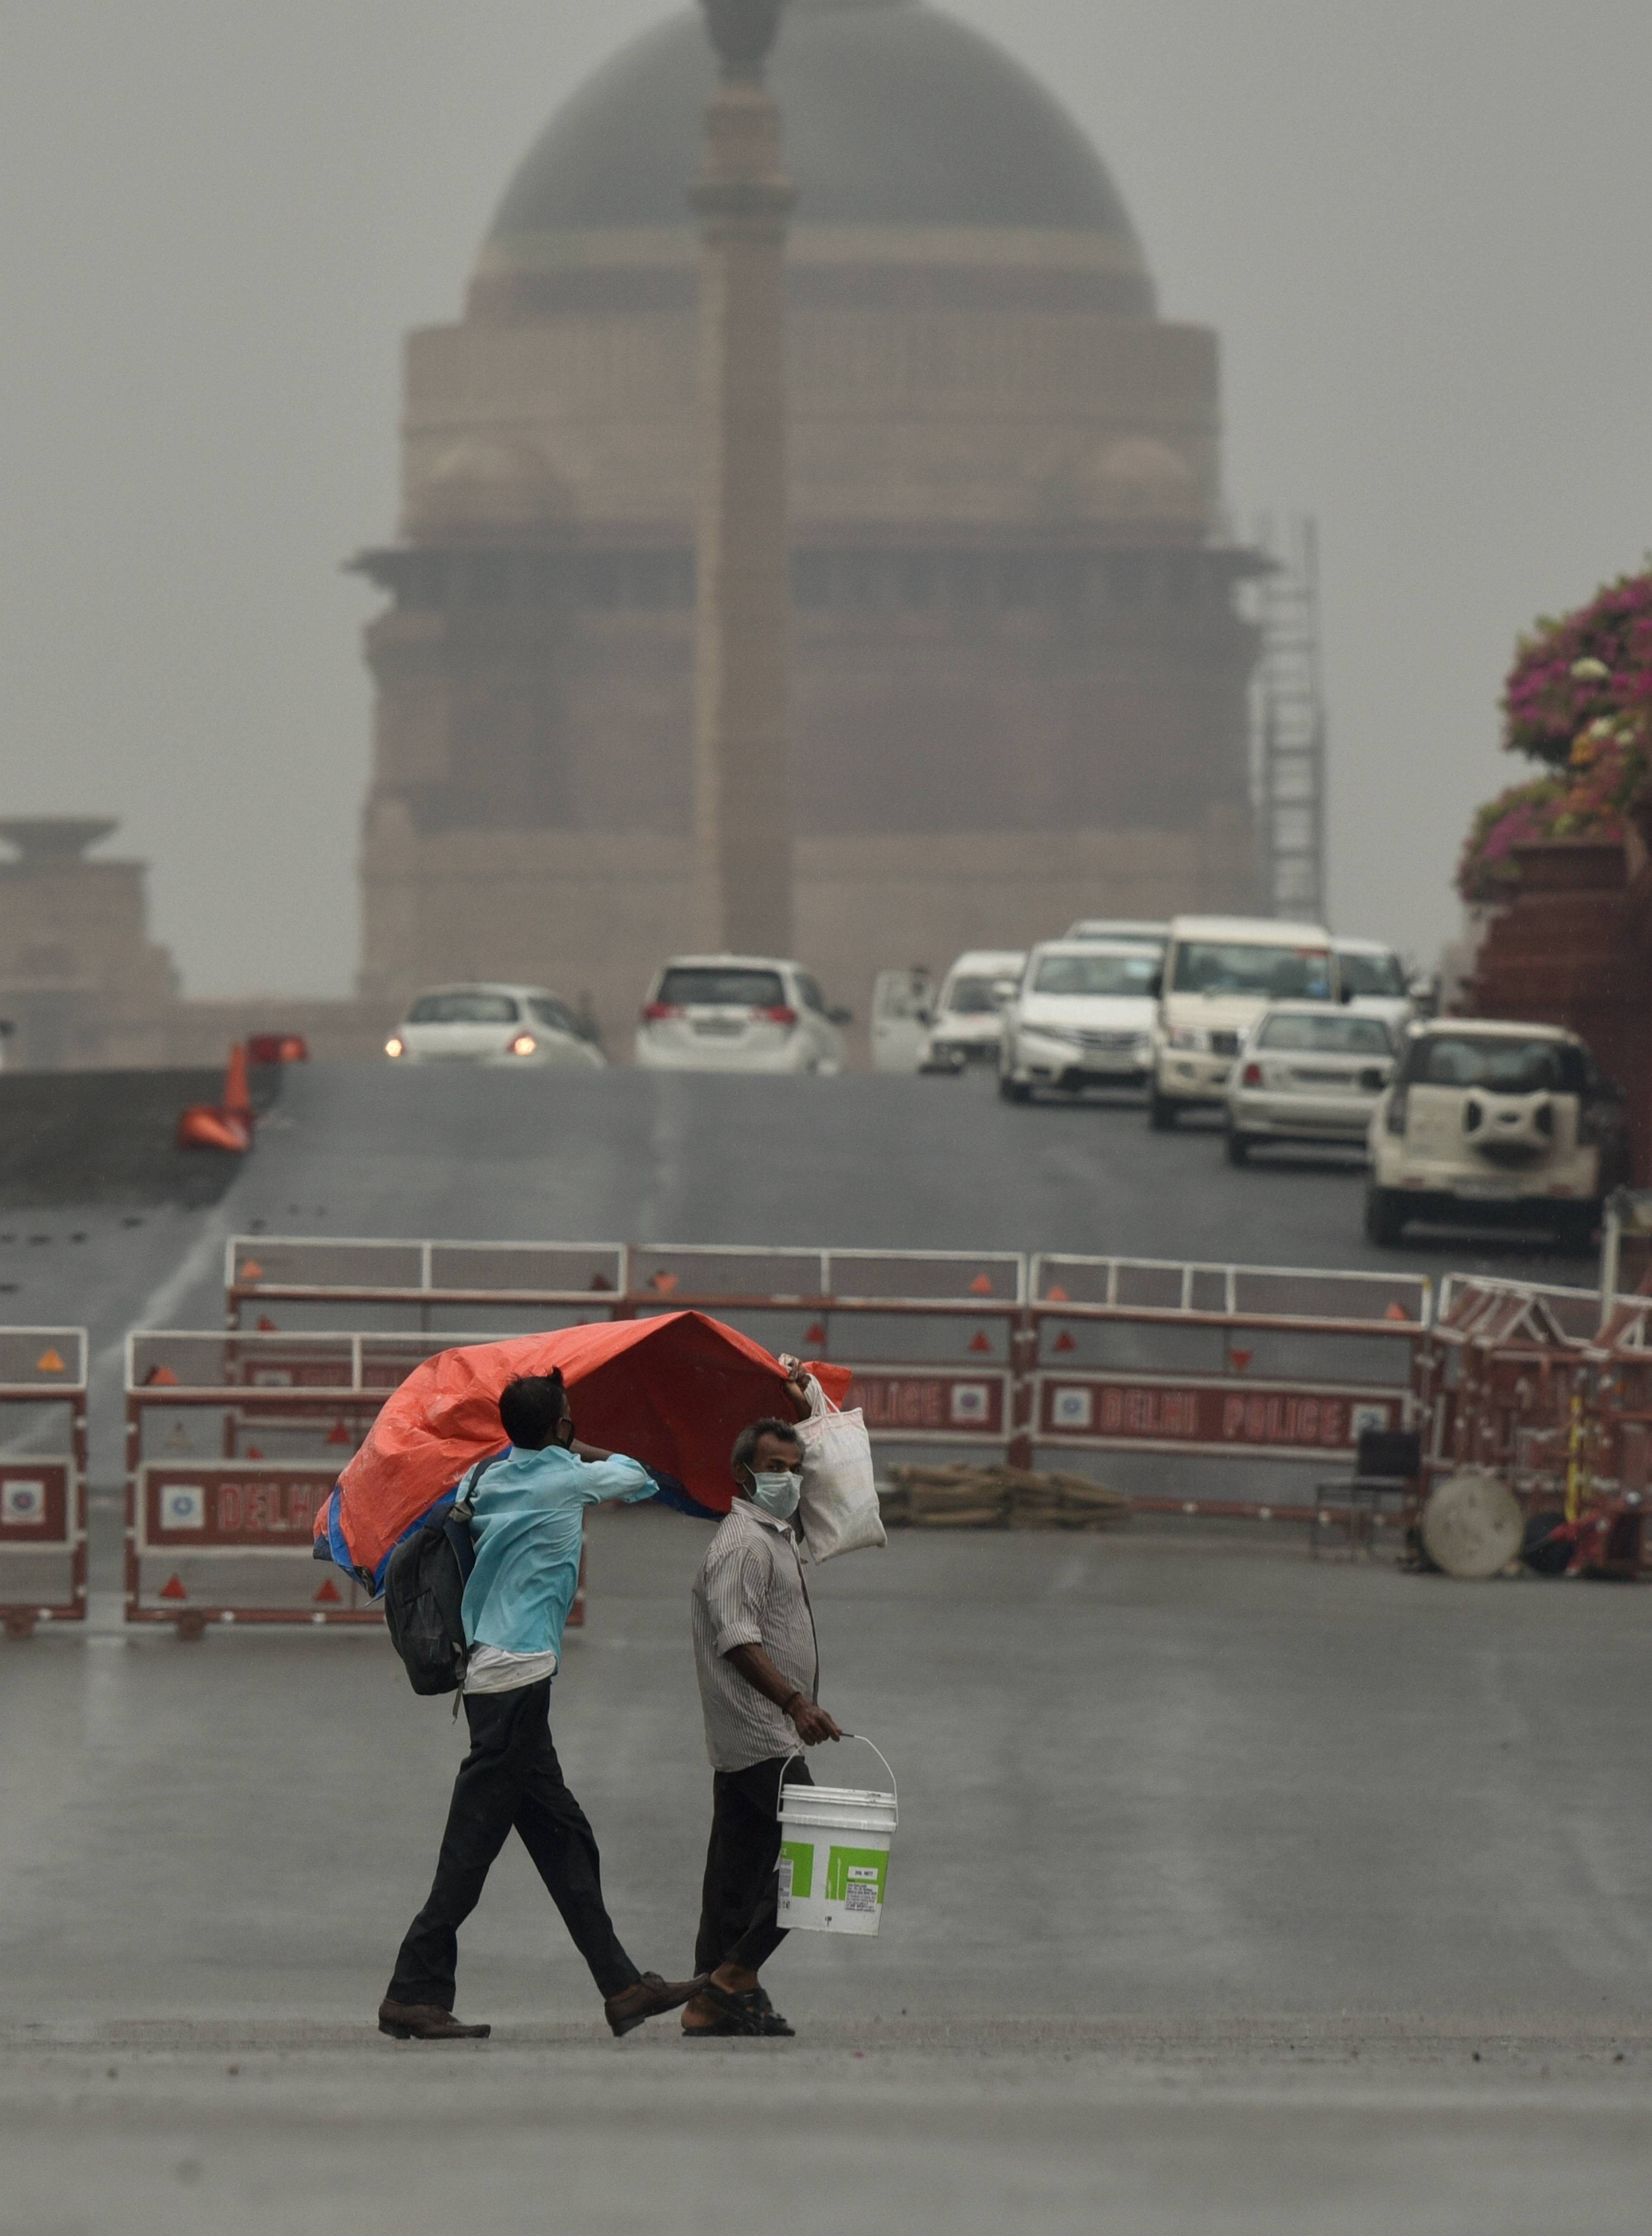 Commuters walk in rain at Vijay Chowk during the ongoing COVID-19 lockdown, in New Delhi, Wednesday, June 10, 2020. (PTI Photo)